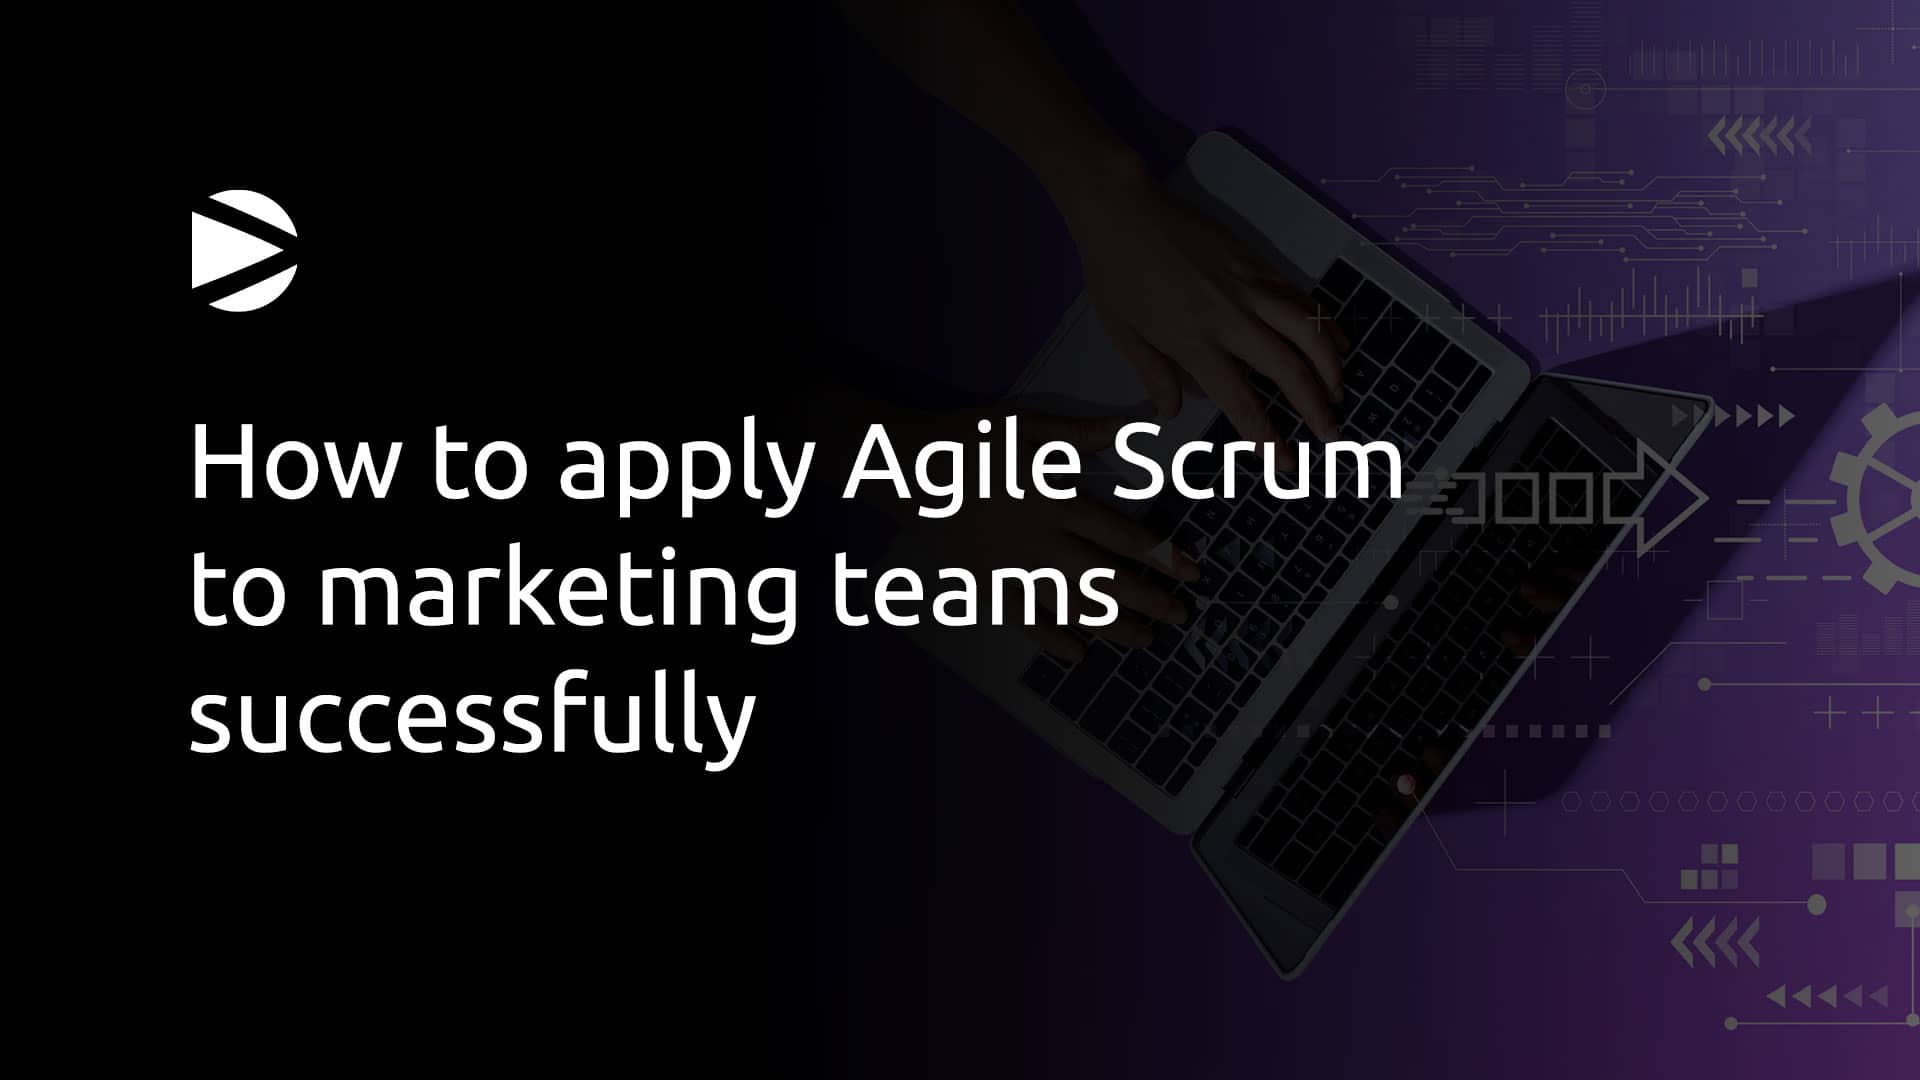 How to apply Agile Scrum to marketing teams successfully